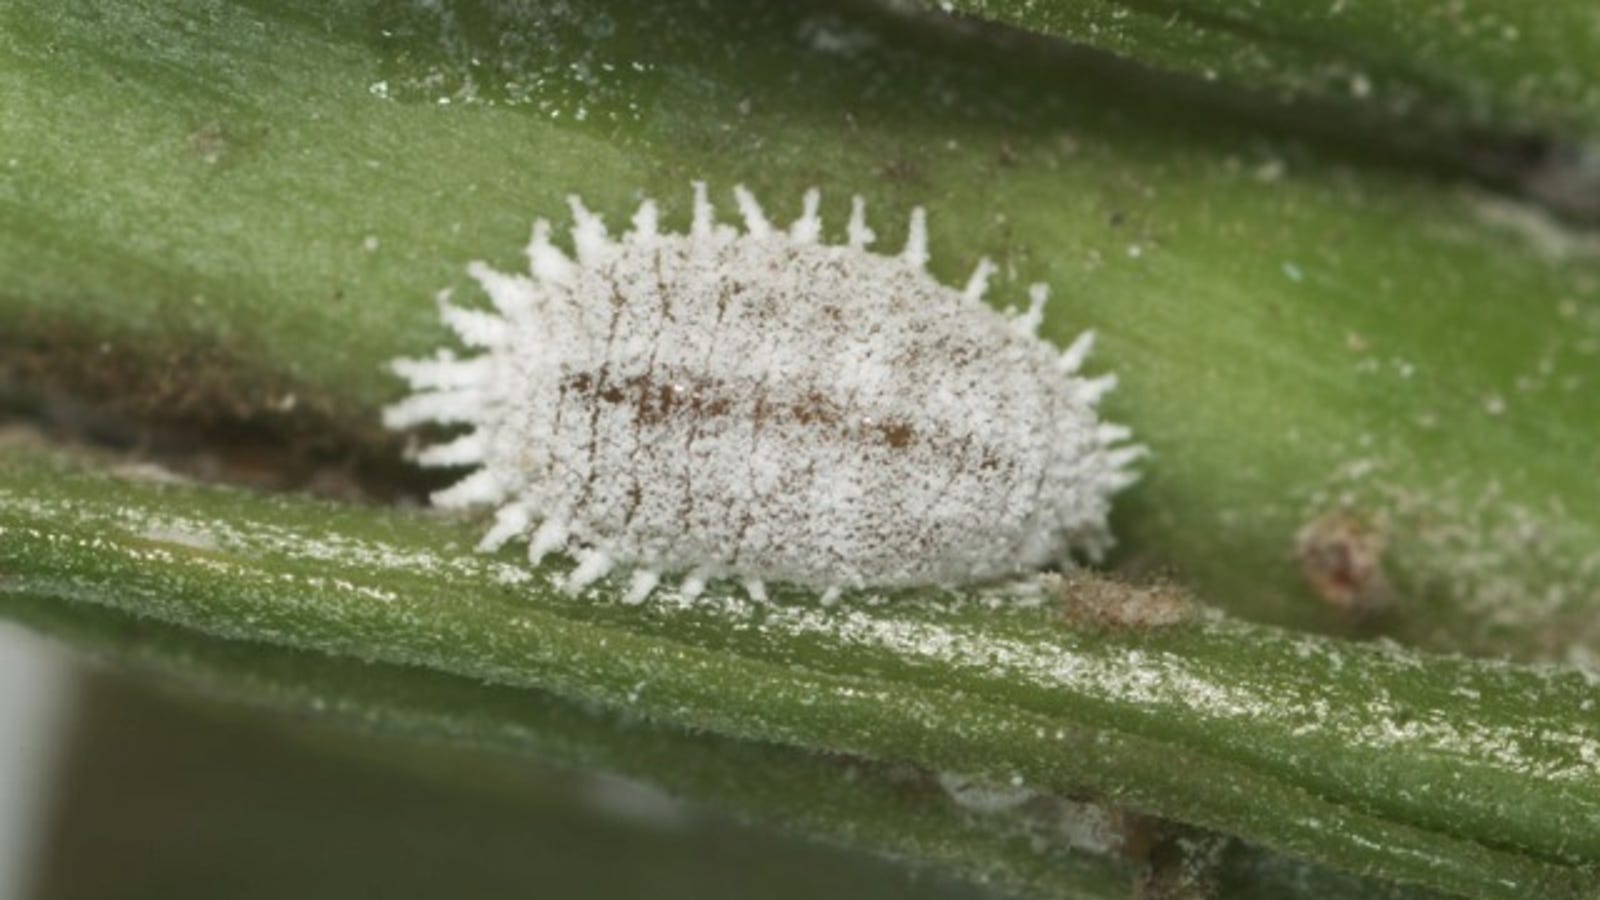 The Ultimate Symbiosis: Mealybugs have bacteria living inside their